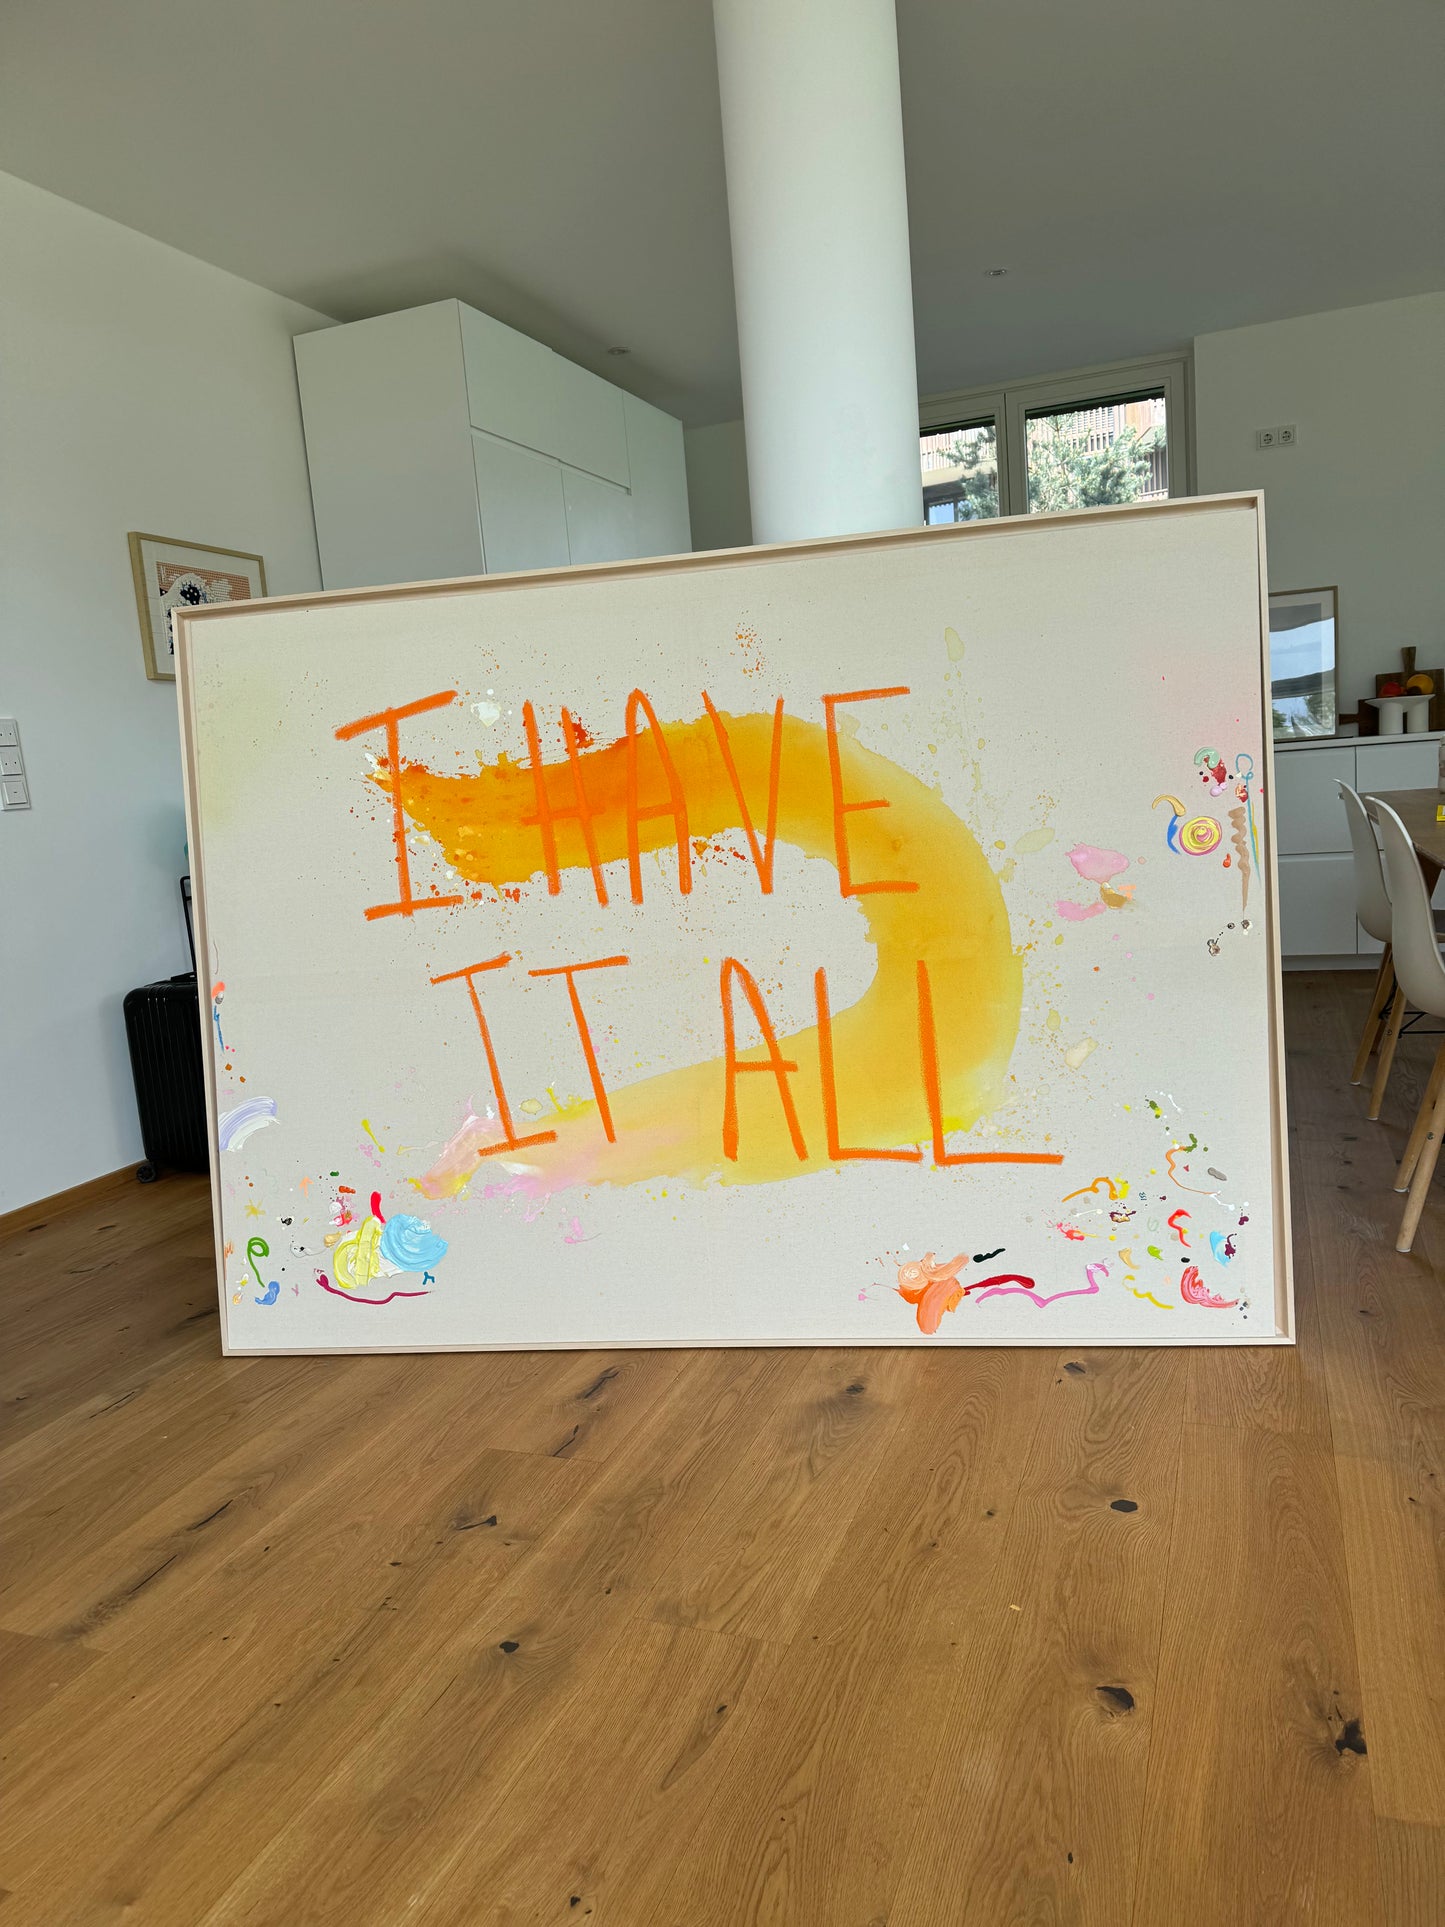 I HAVE IT ALL 183x133cm